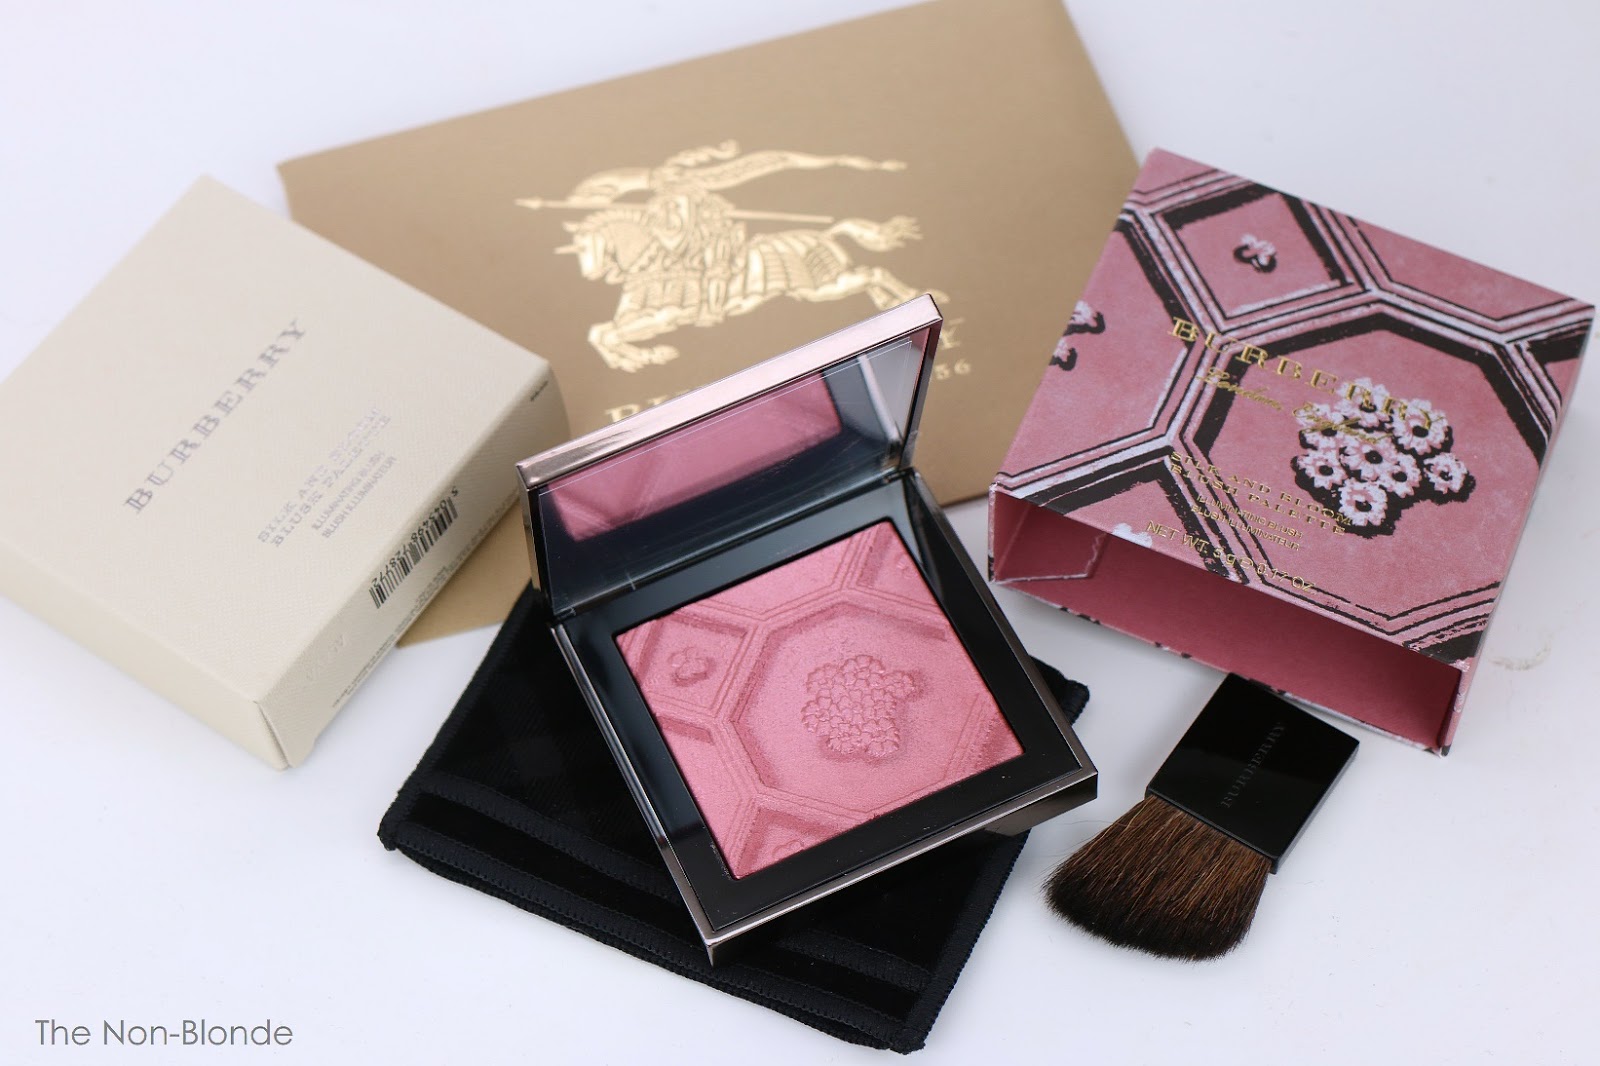 burberry silk and bloom blush